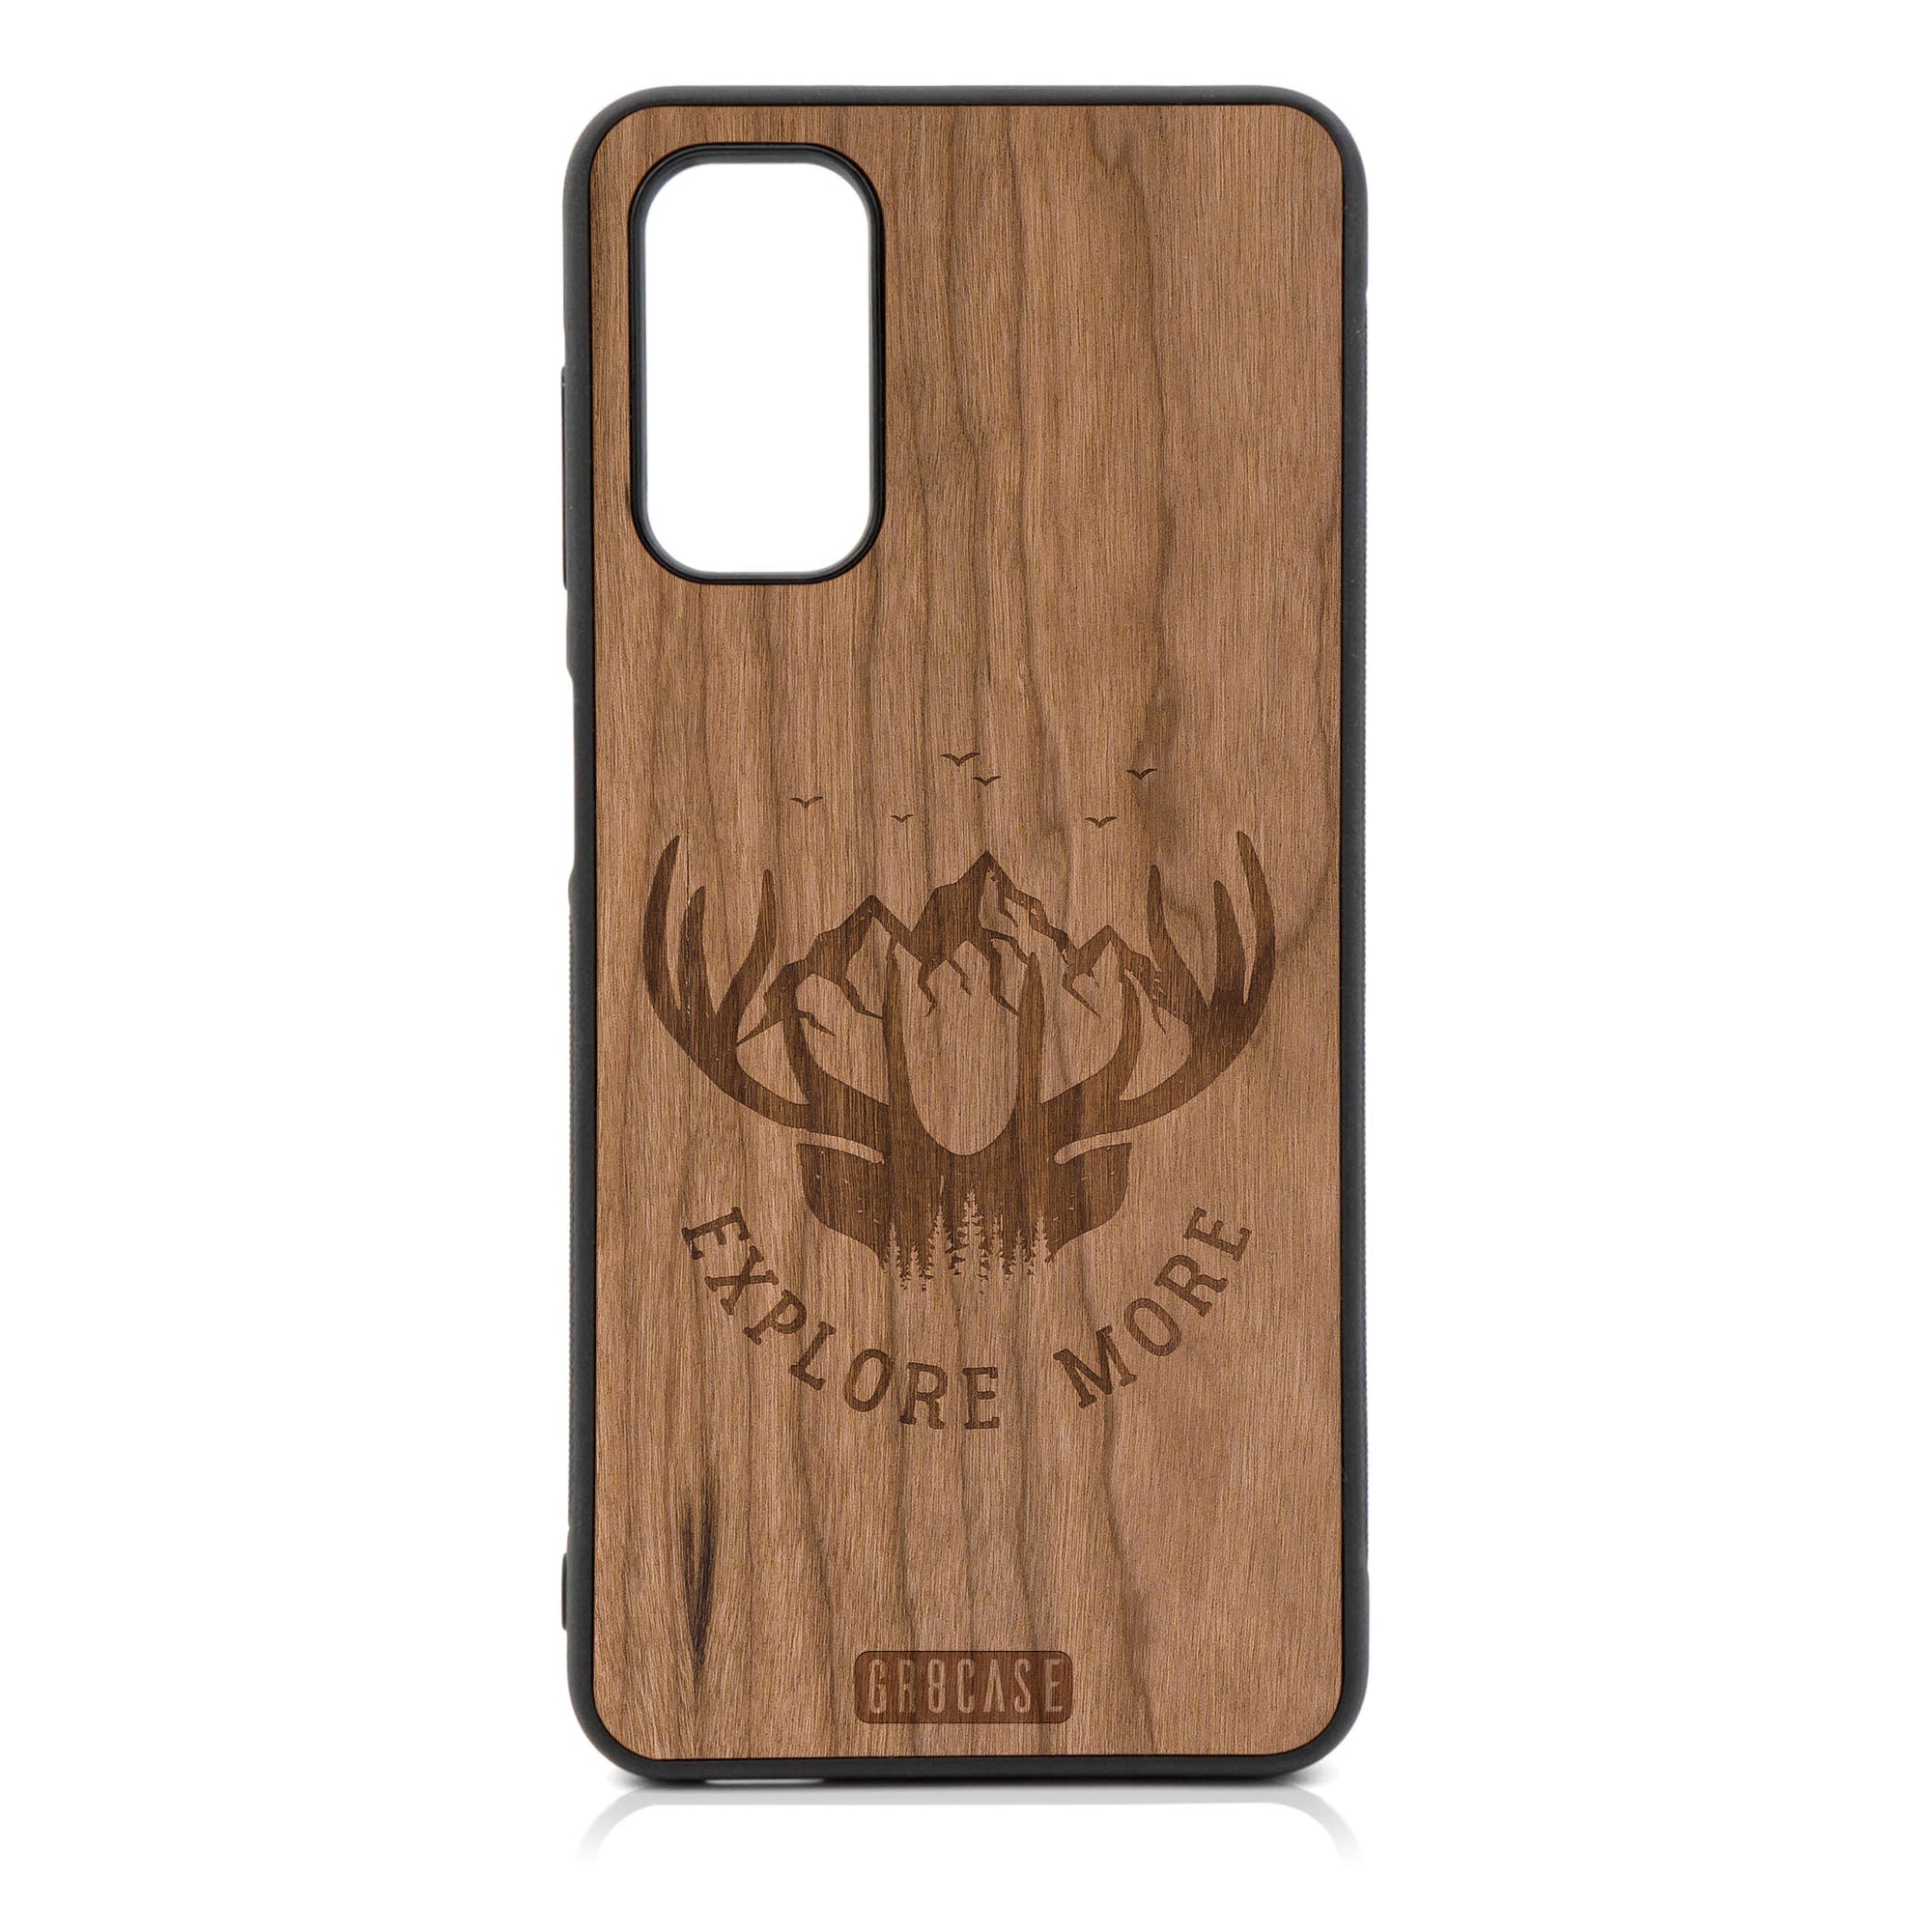 Explore More (Mountain & Antlers) Design Wood Case For Galaxy A13 5G